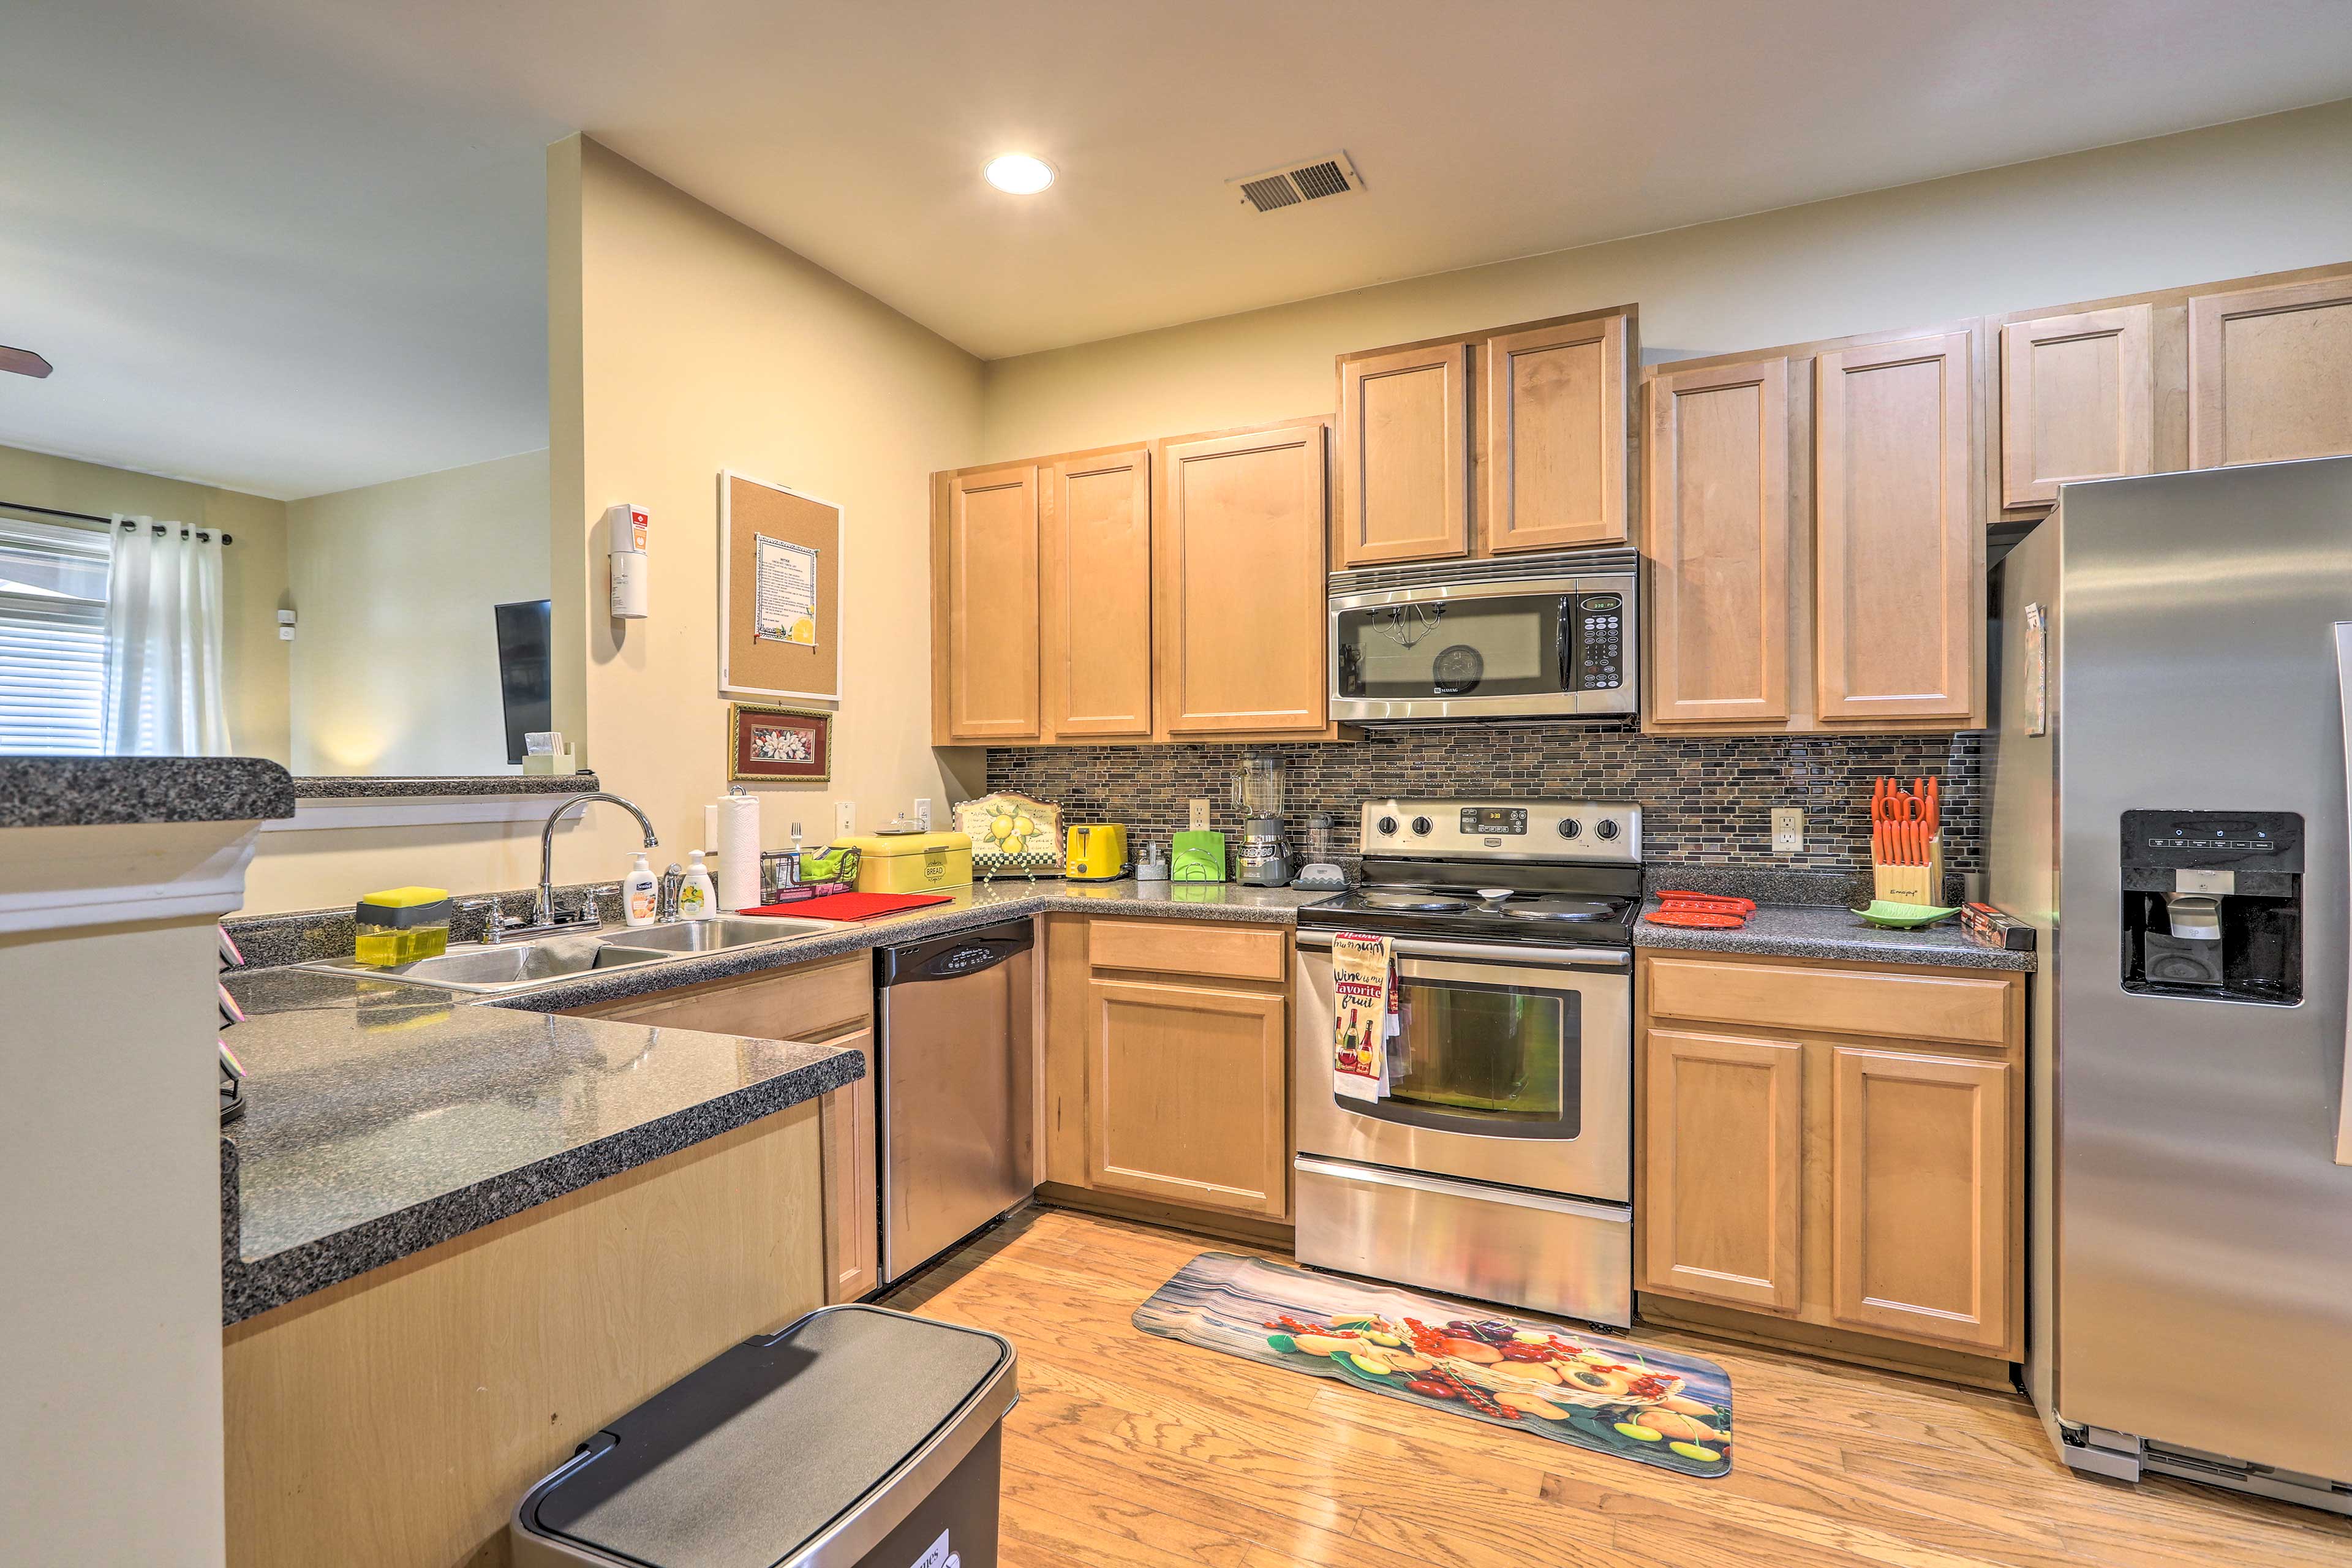 Kitchen | Fully Equipped | Cooking Basics | Spices | Coffee Maker | Toaster